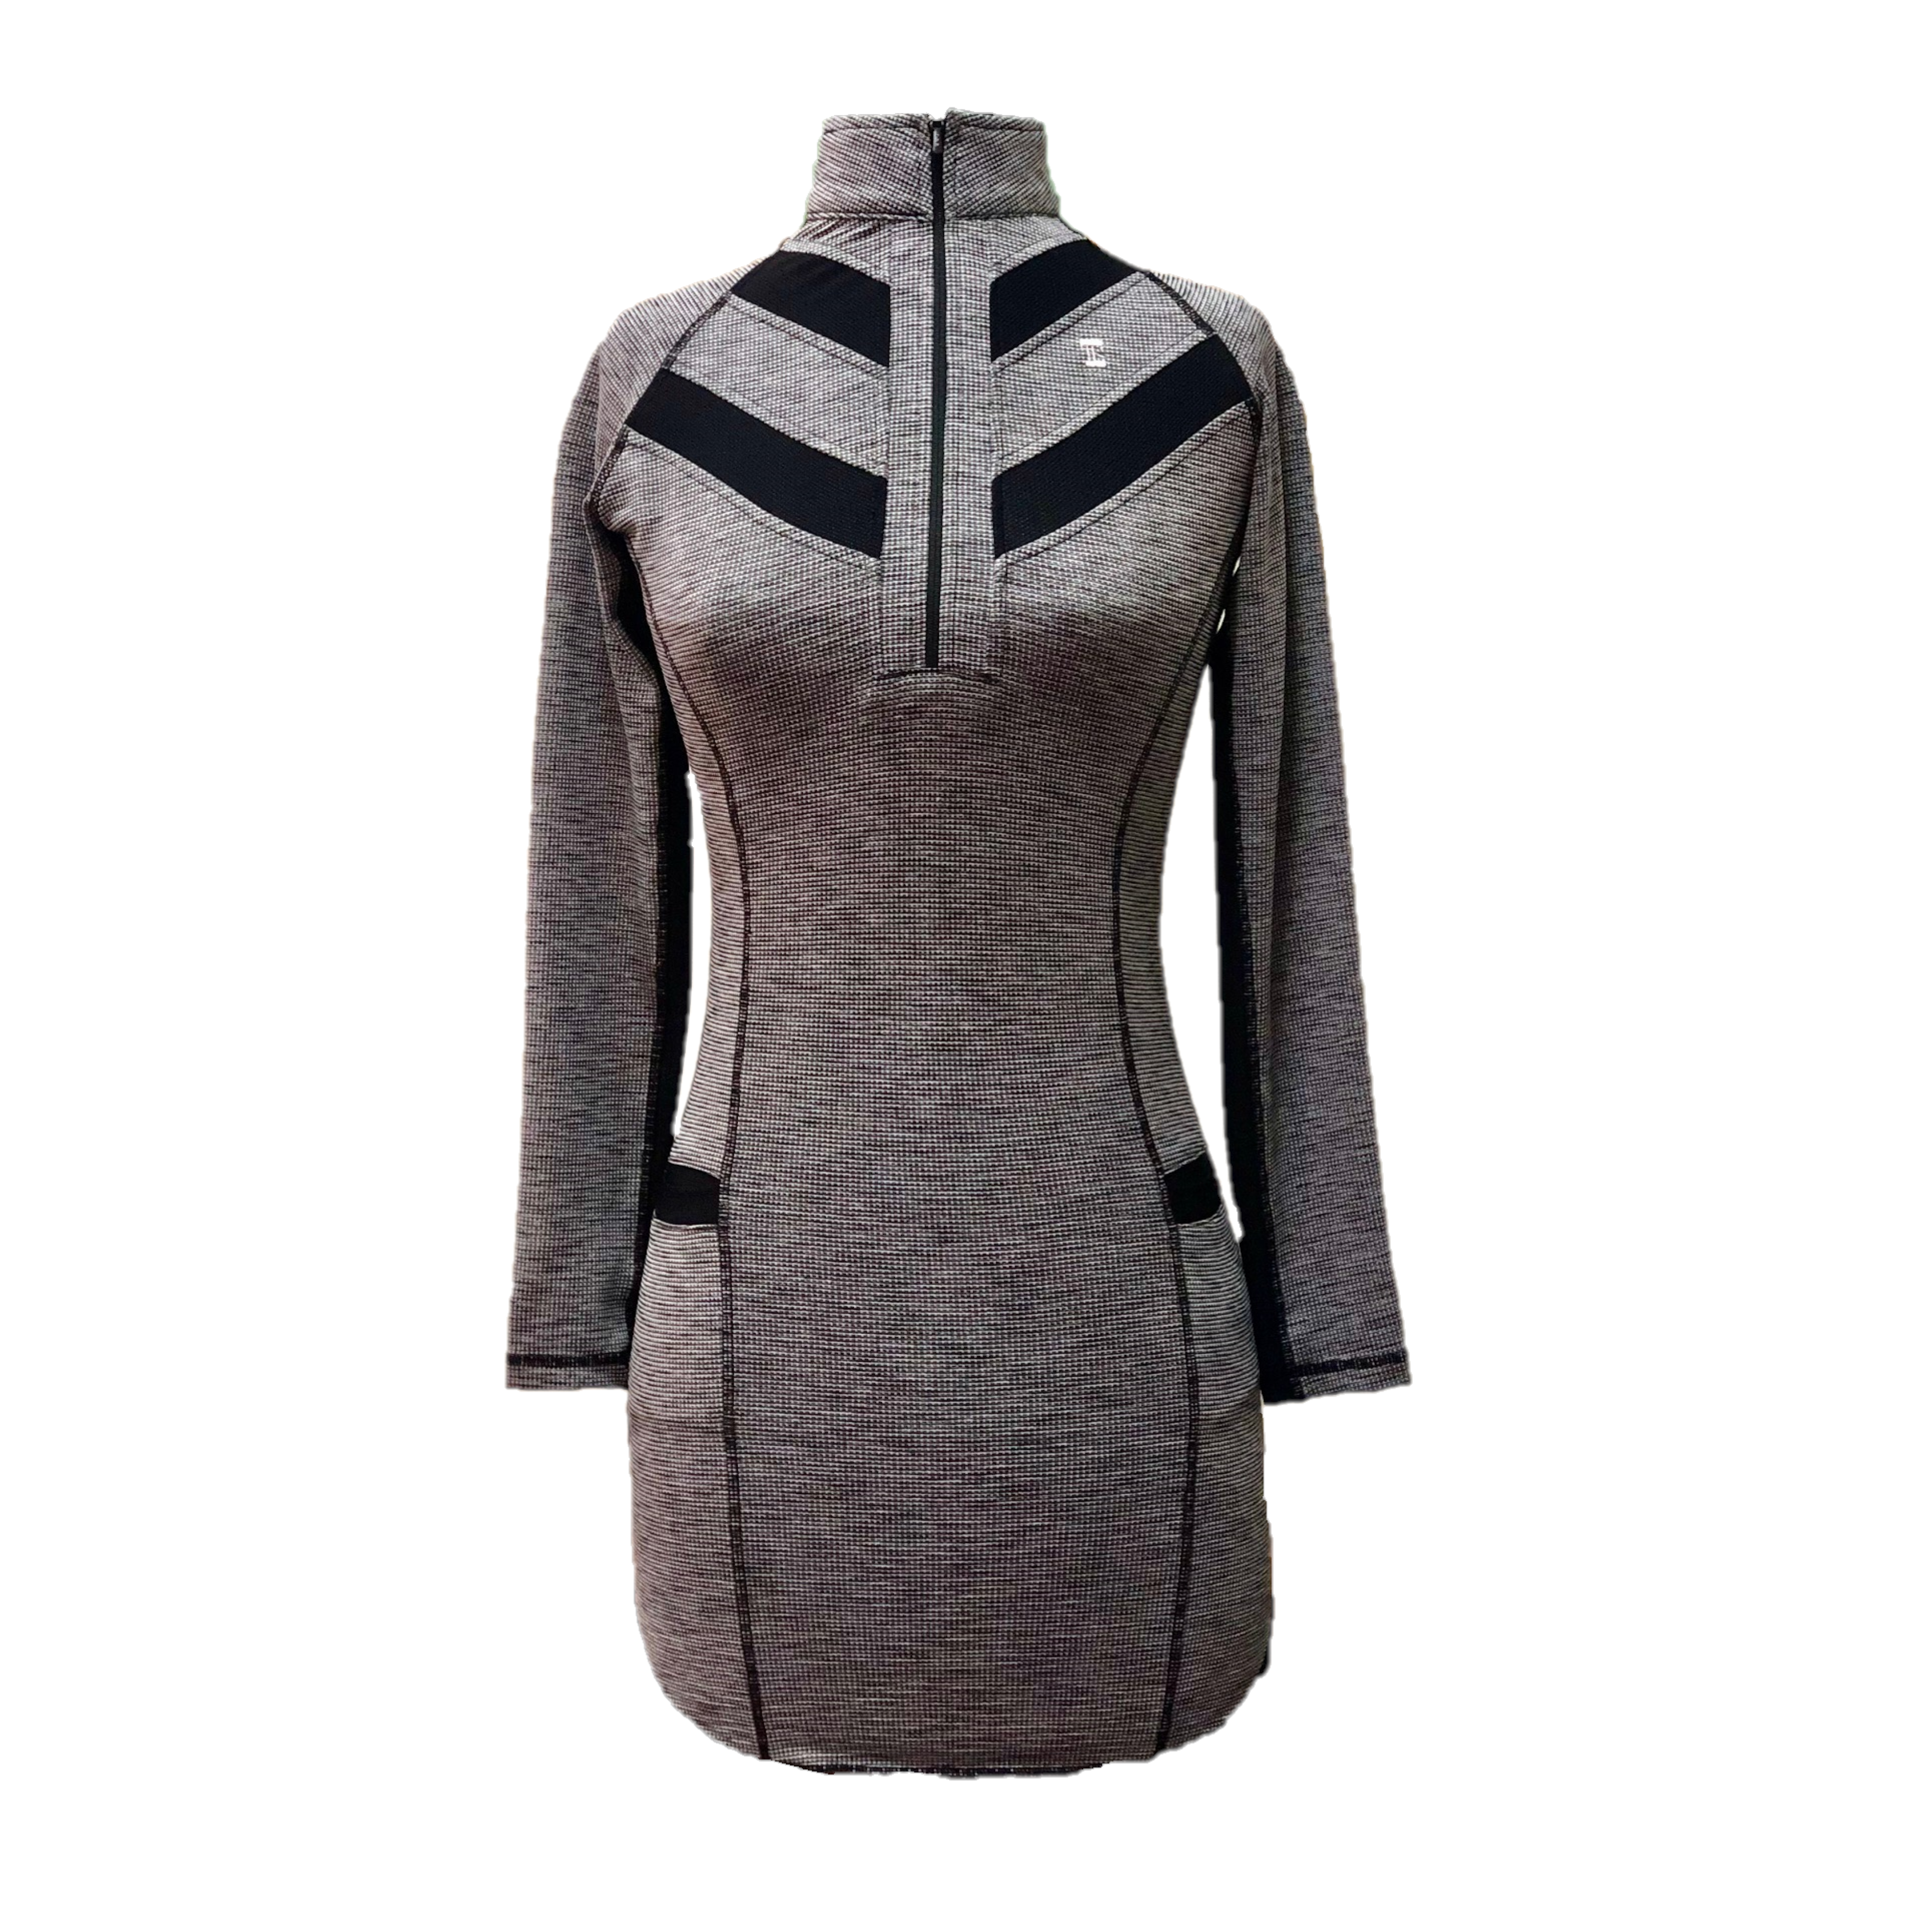 GD-018 || Golf Dress Long Sleeved Charcoal and White Textured Fabric, Wide Back Chevron Stripes 2 Each Side of Front Collar, Zip Mock Polo Neck, 2 Front Pockets with Black Trim